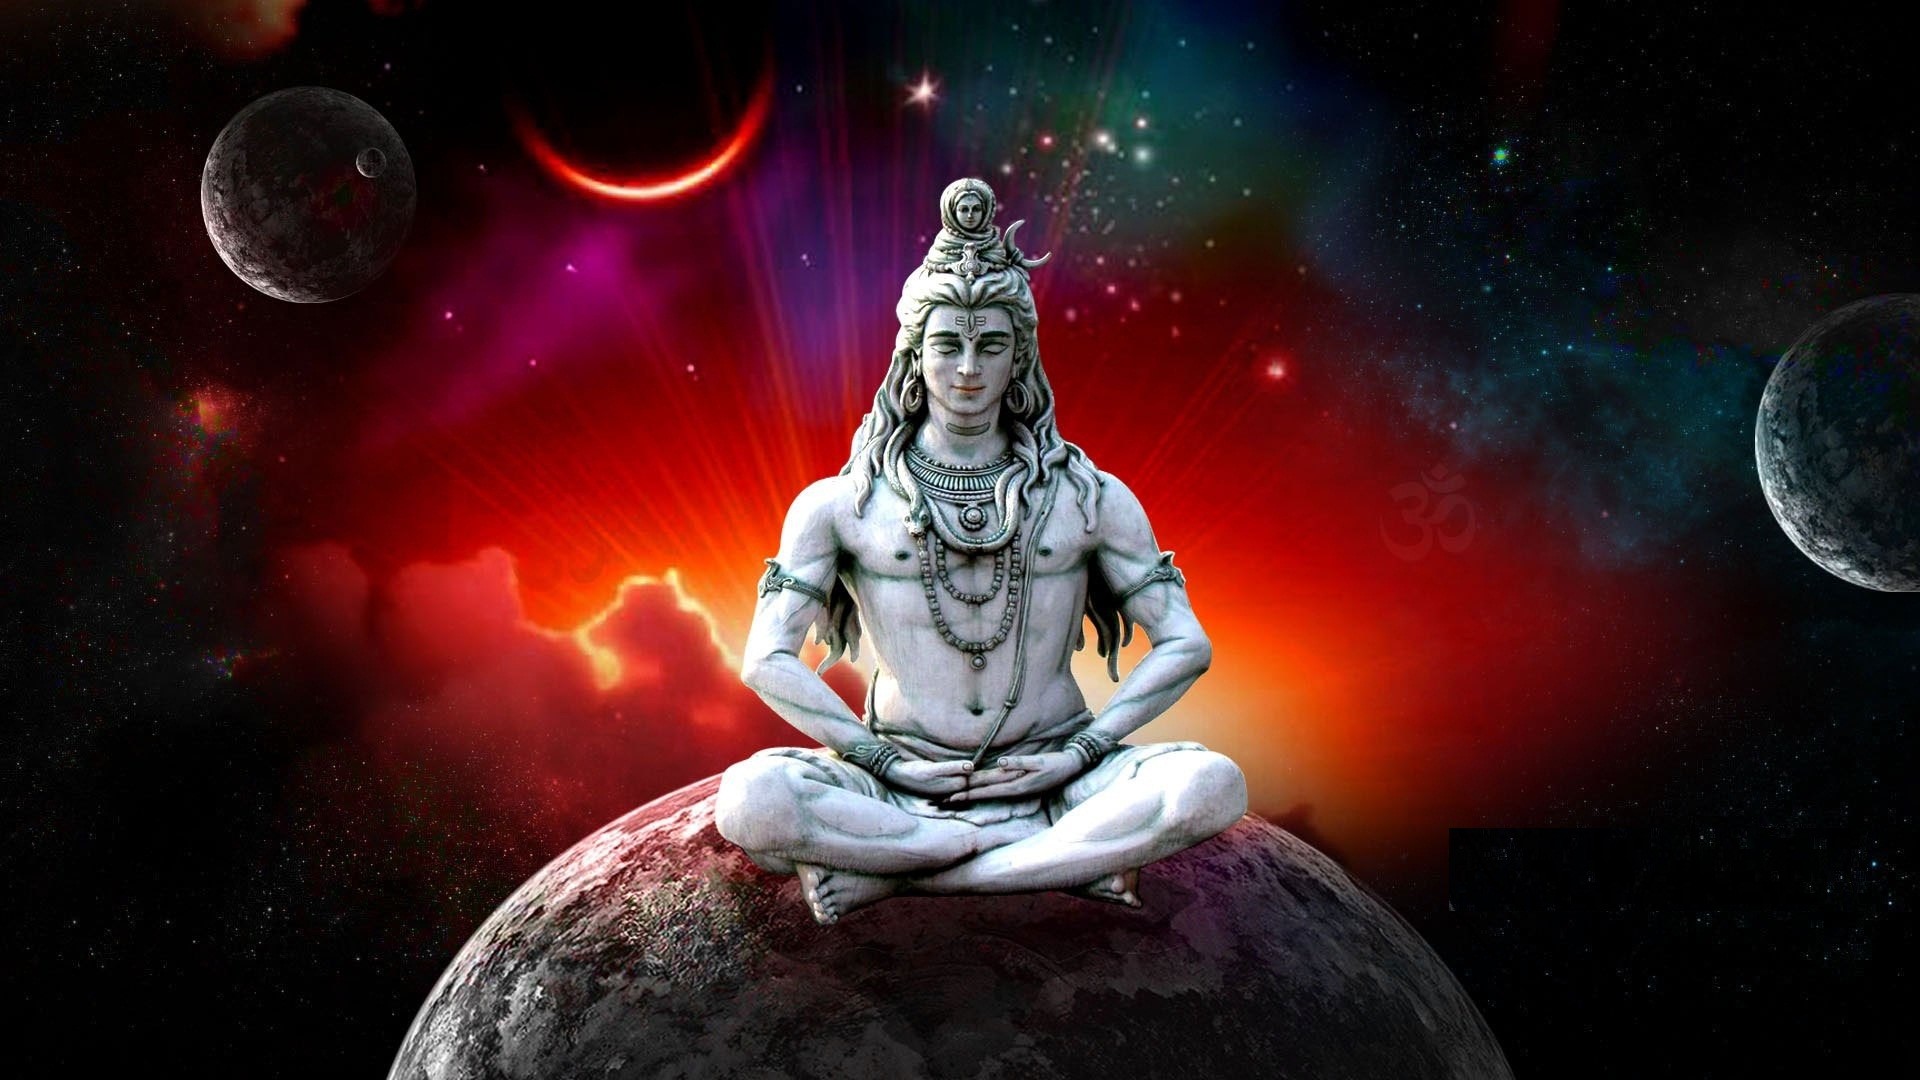 1920x1080 ... Best 108+ Lord Shiva Images ...